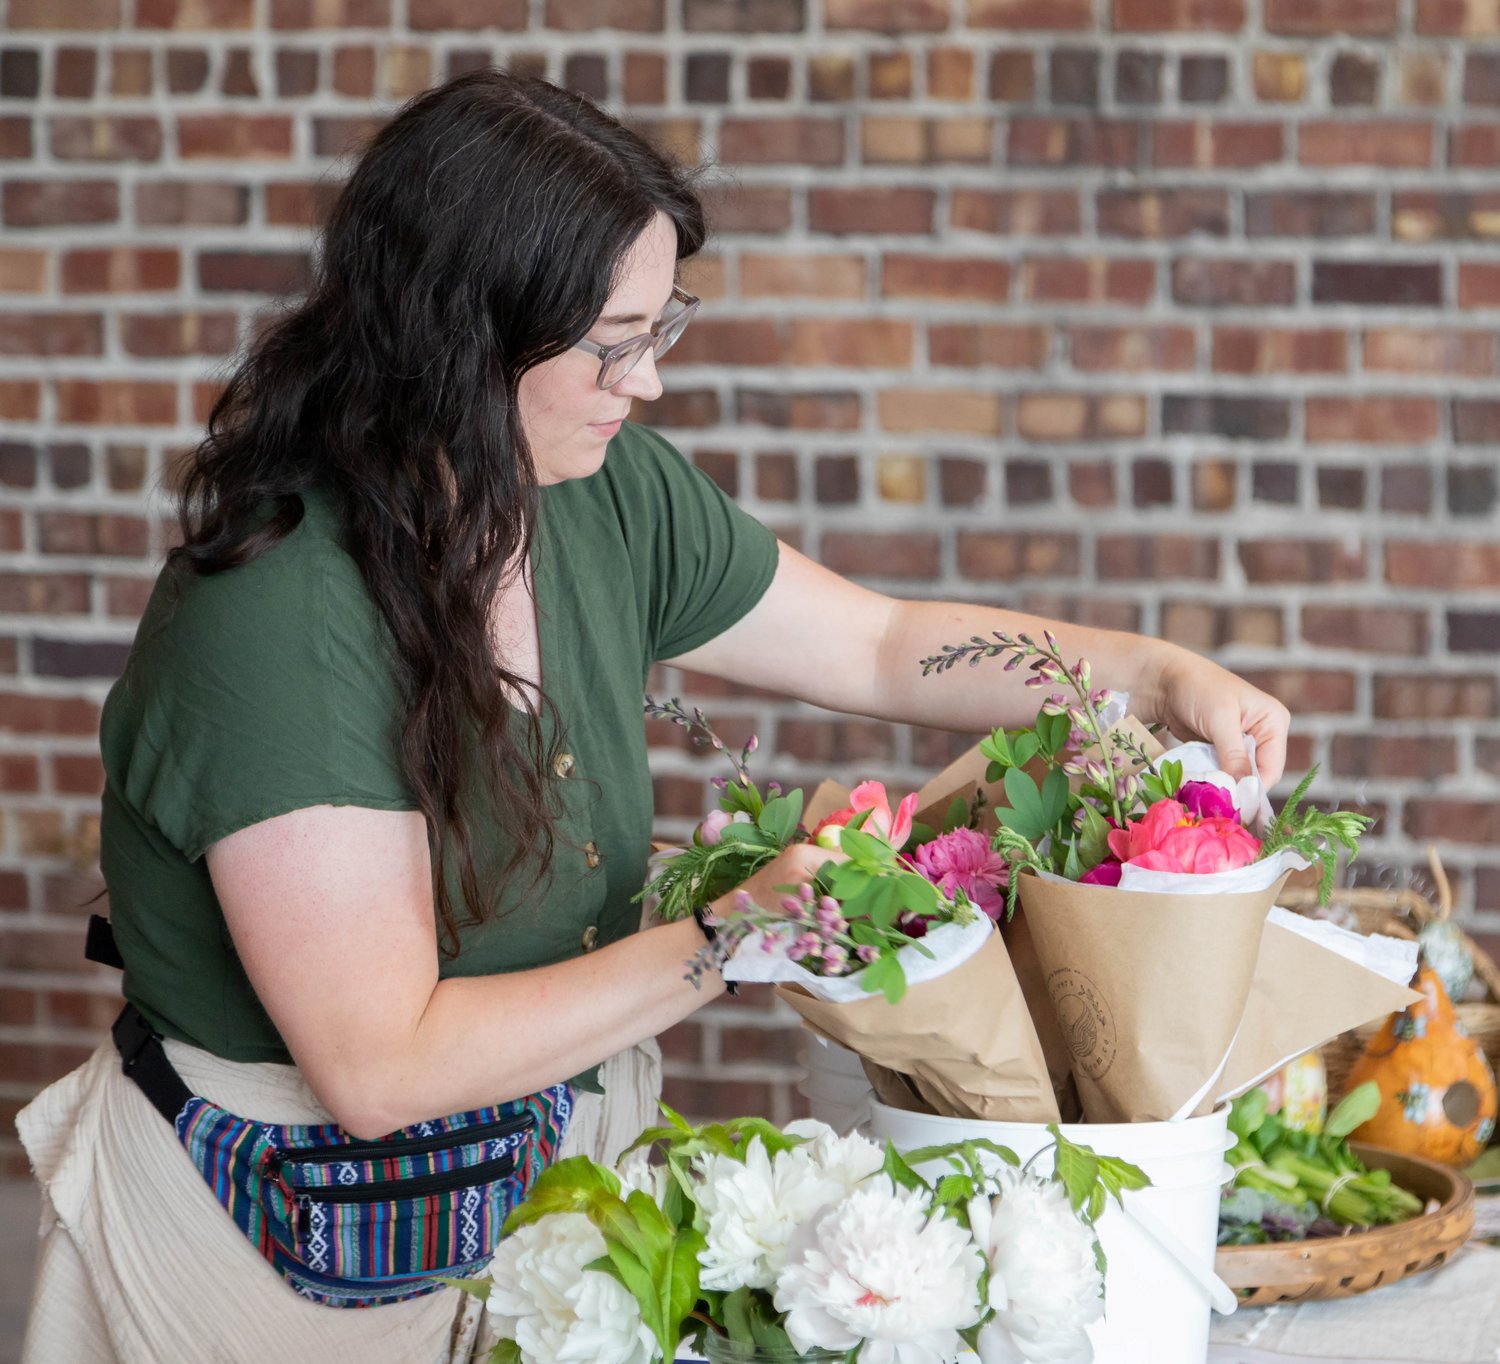 Kadie Crivello arranges flowers during the inaugural farmer’s market of the 2022 season. Despite some rain, residents arrived to check out the vendors and activities offered Thursday at The Fennel.